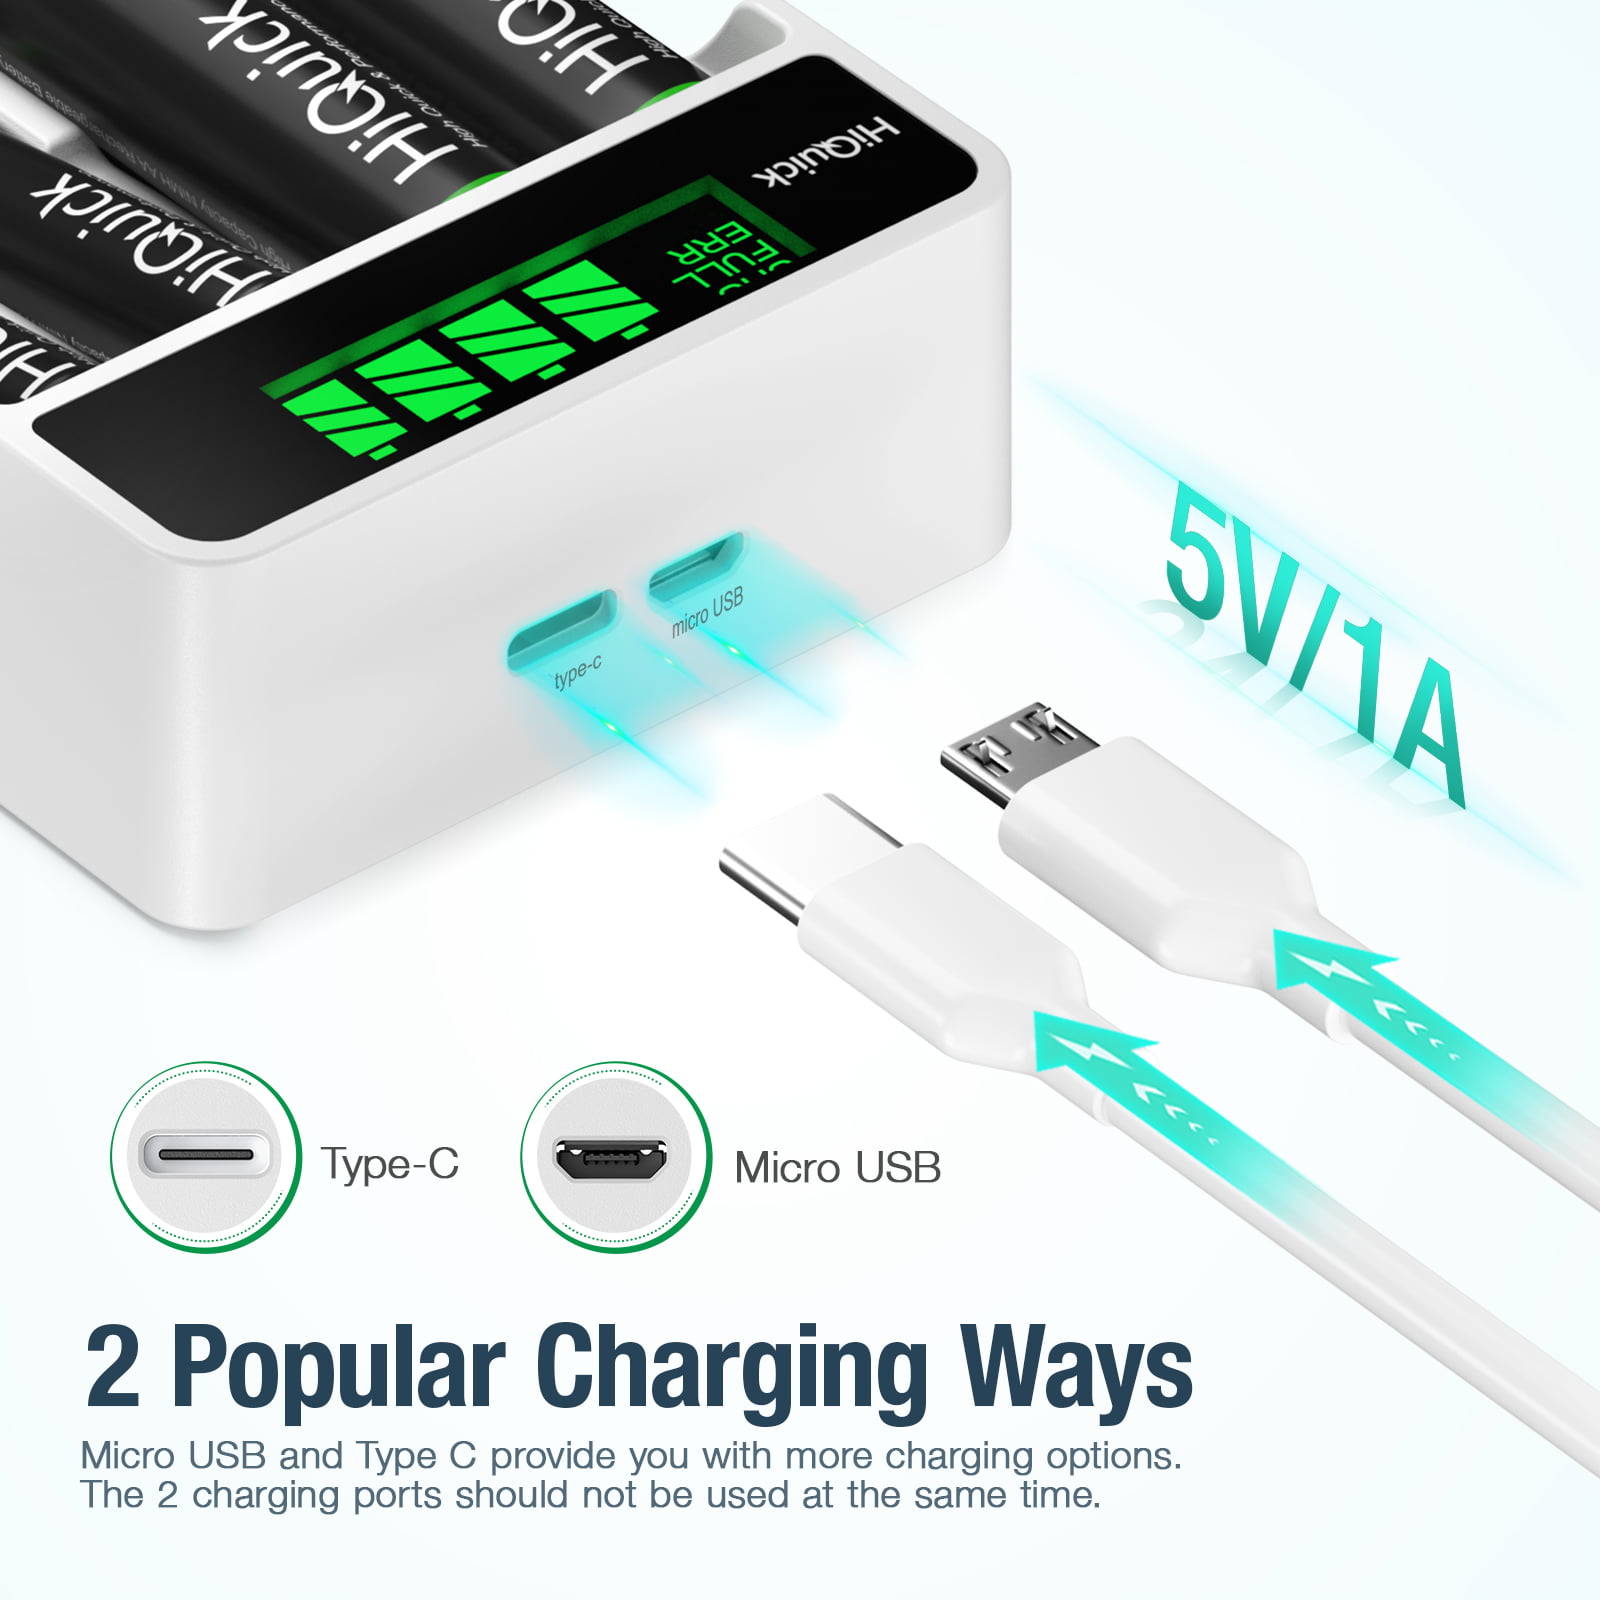 HiQuick Rechargeable AA Battery Charger with LCD Display,Independent Slots Fast Charging-Micro USB &Type C Input,Practical Slots Design for AA,AAA Ni-MH Ni-CD Rechargeable Batteries Charger,4 Bay. 